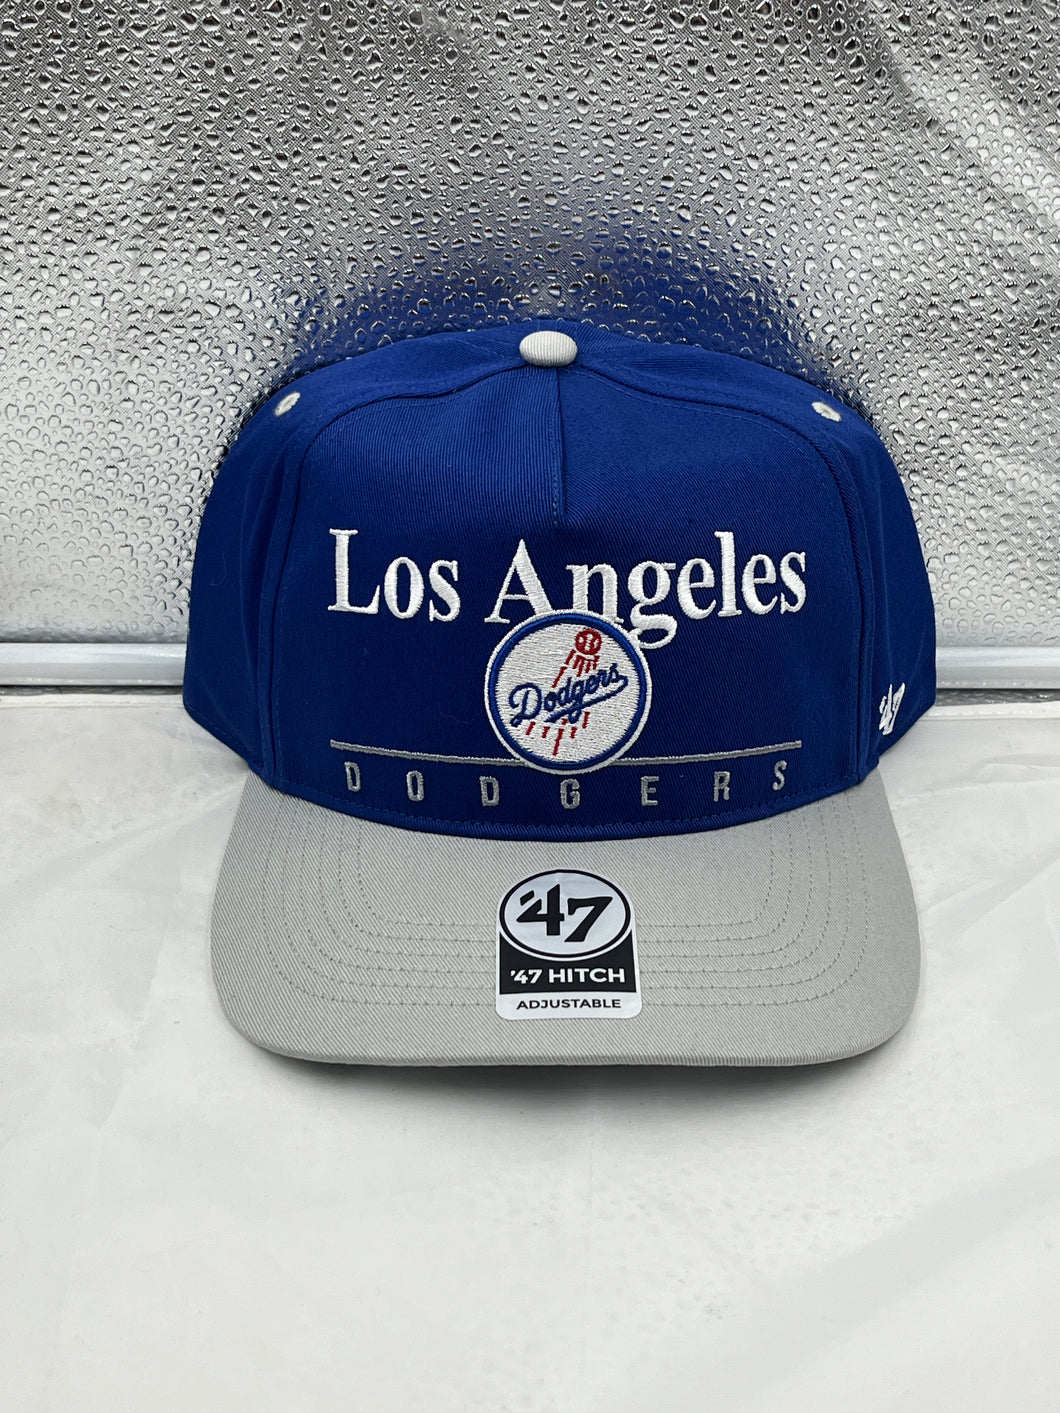 Los Angeles Dodgers MLB '47 Brand Throwback Blue Hitch Adjustable Snapback Hat - Casey's Sports Store